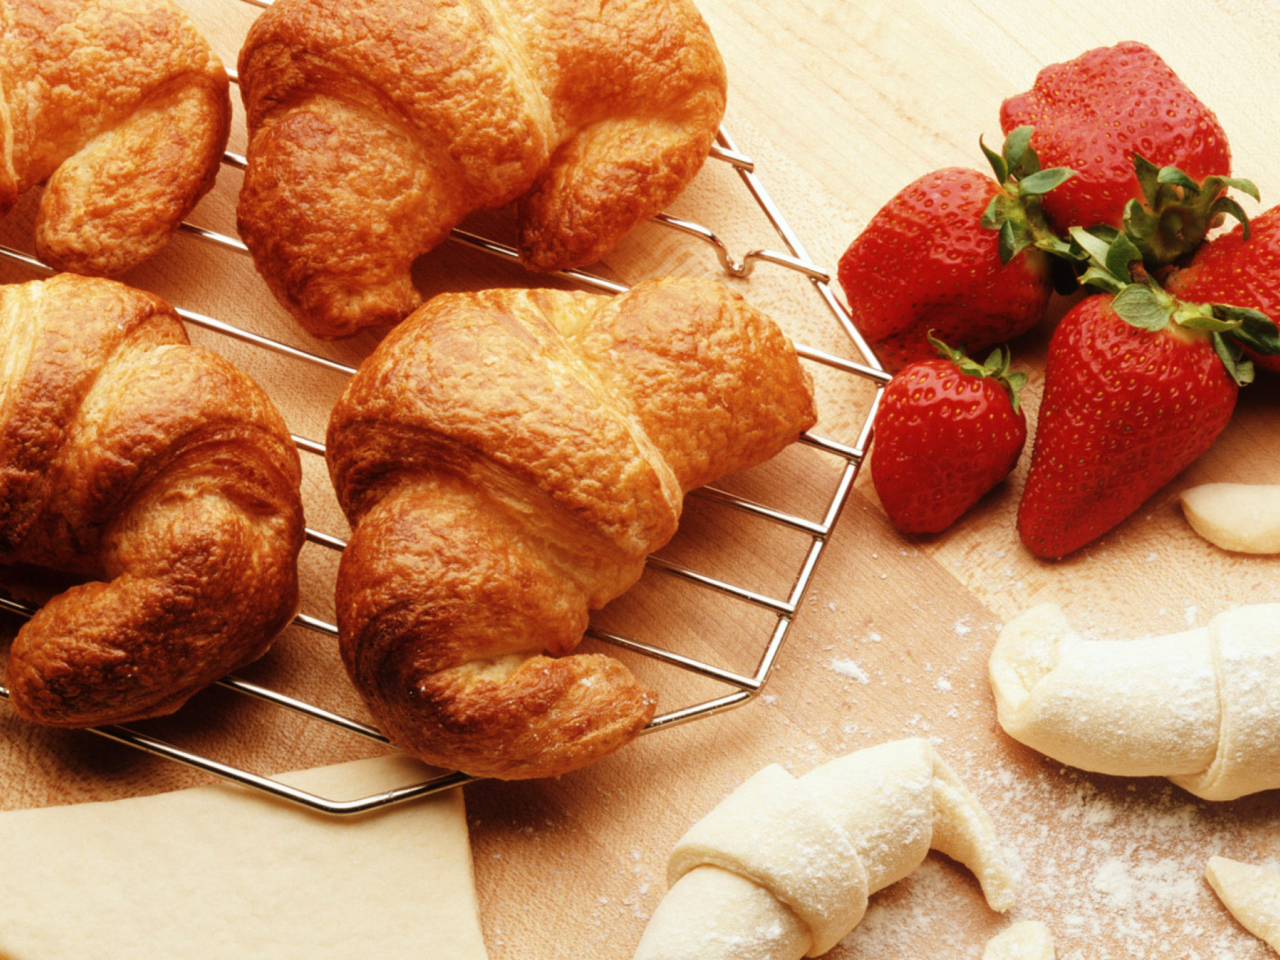 Croissants And Strawberries wallpaper 1280x960